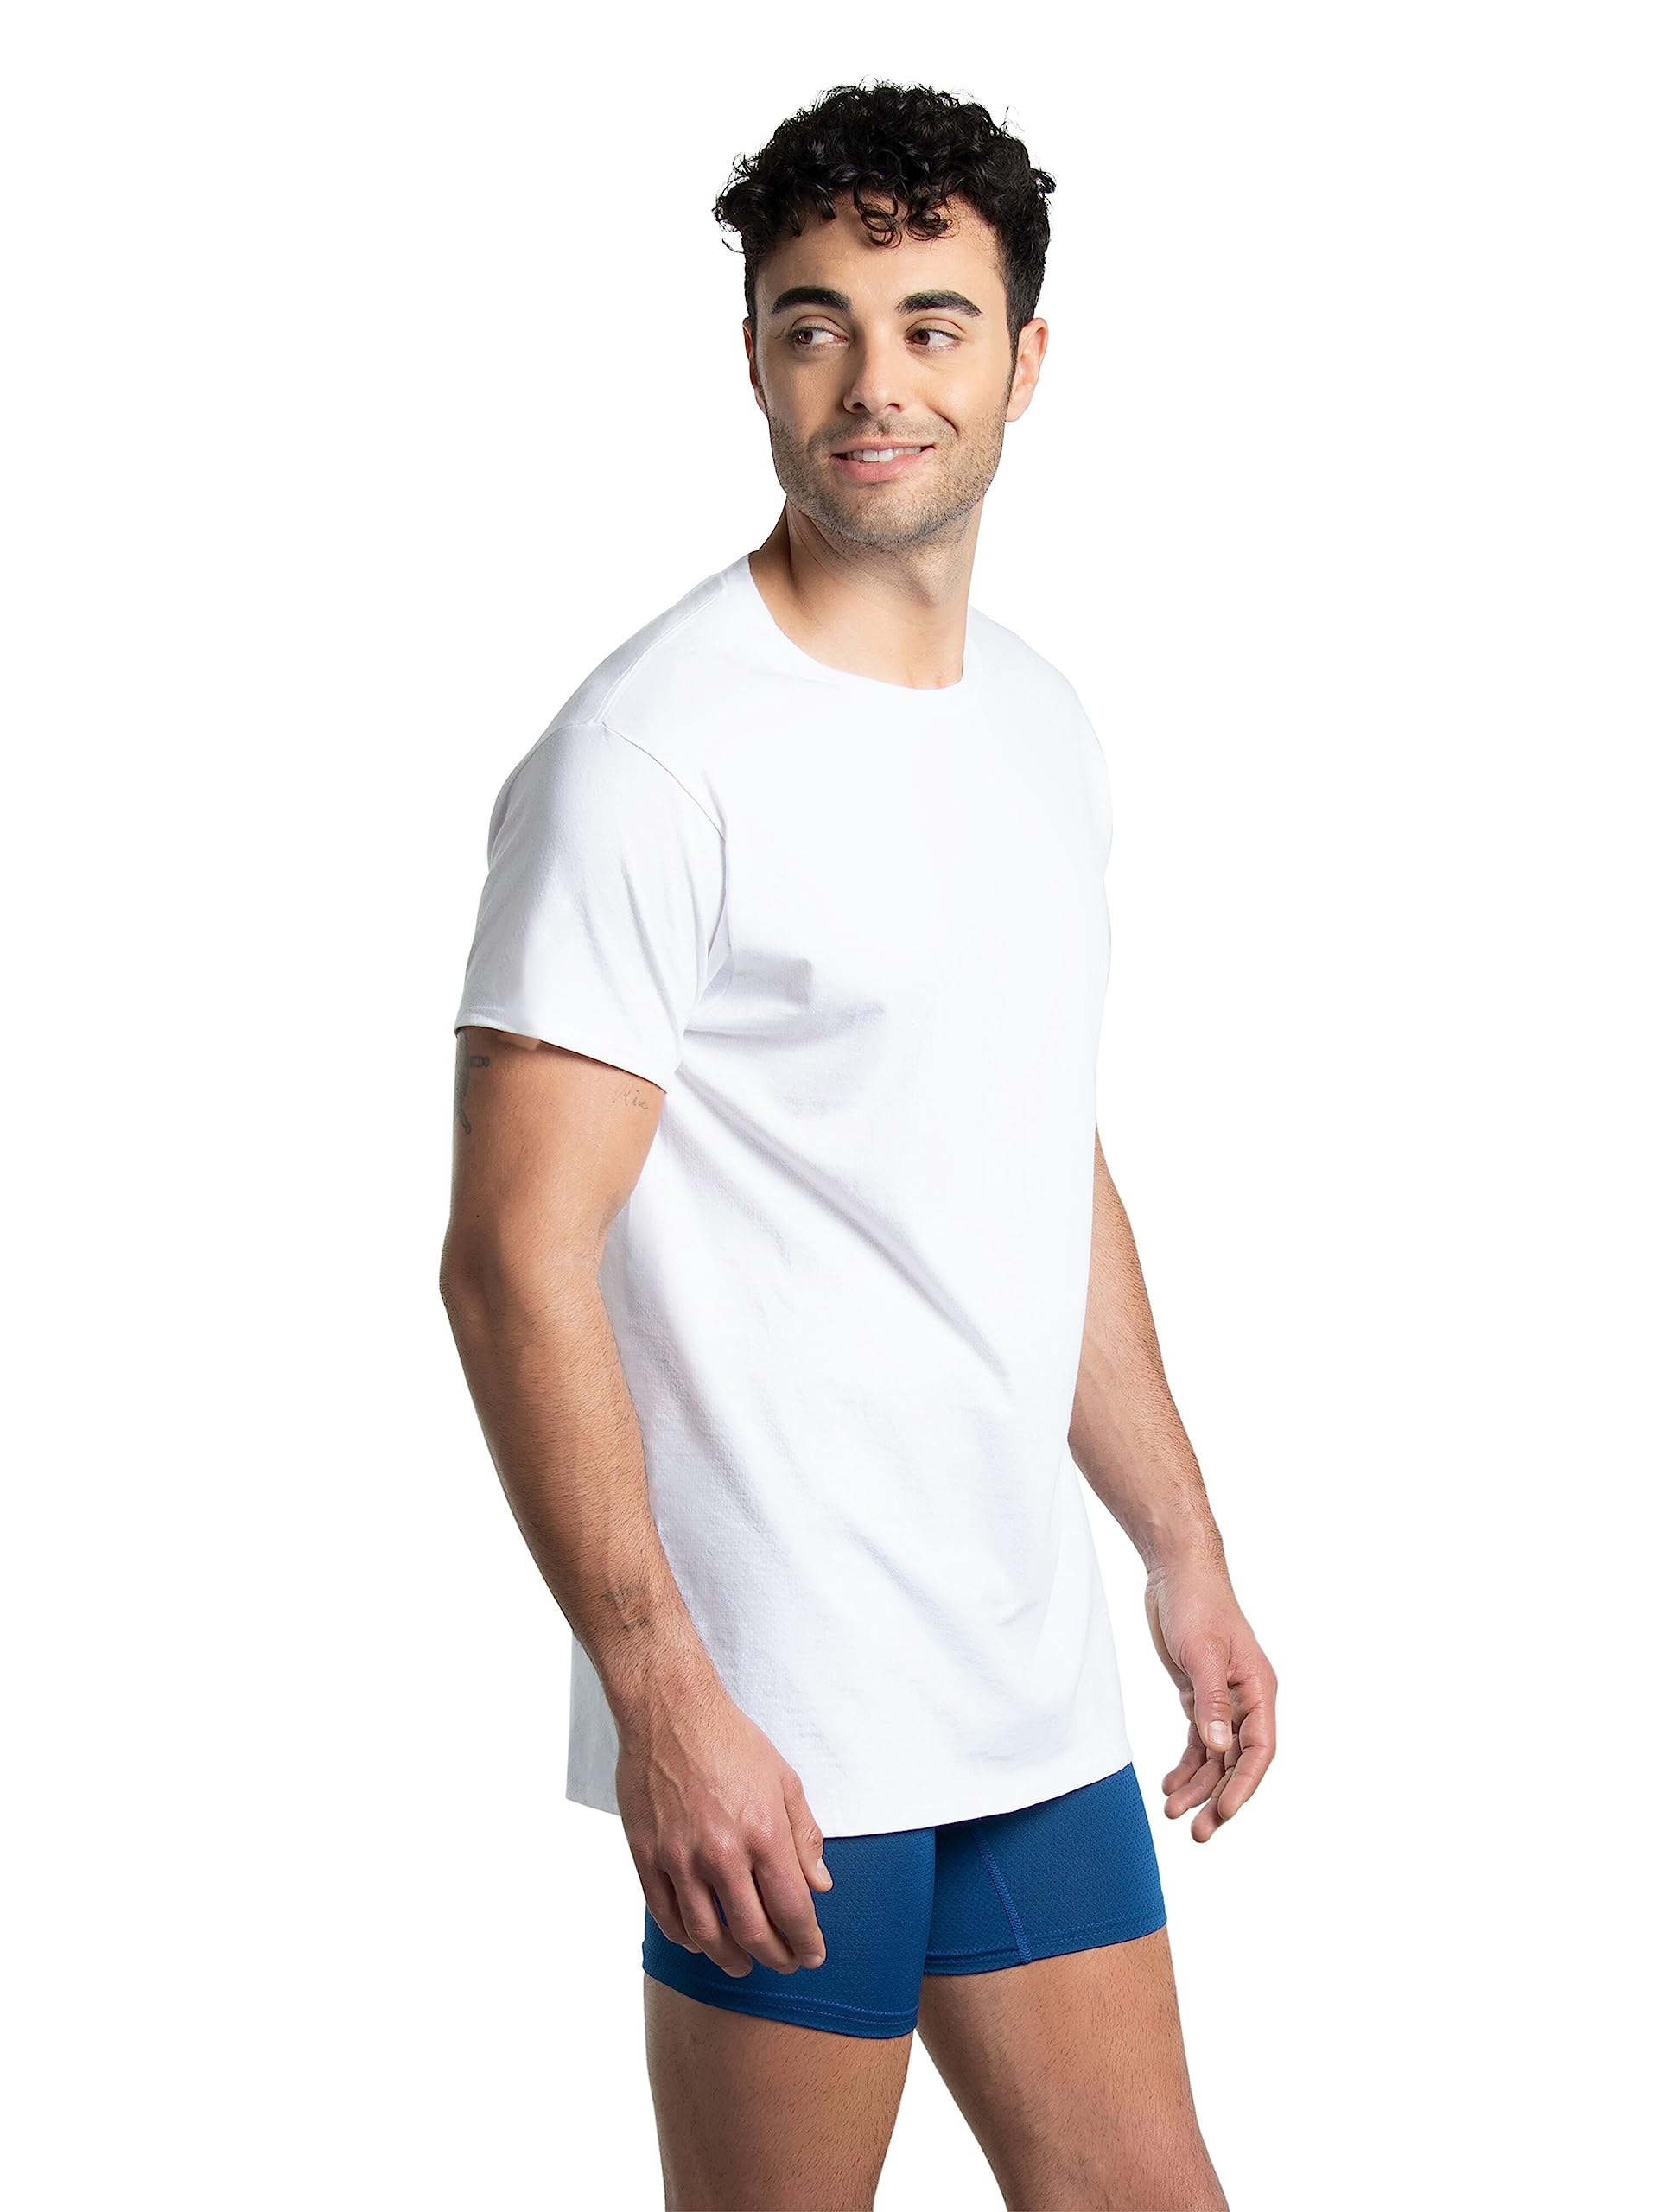 Fruit of the Loom Men's Breathable Undershirts, Designed to Keep You Cool